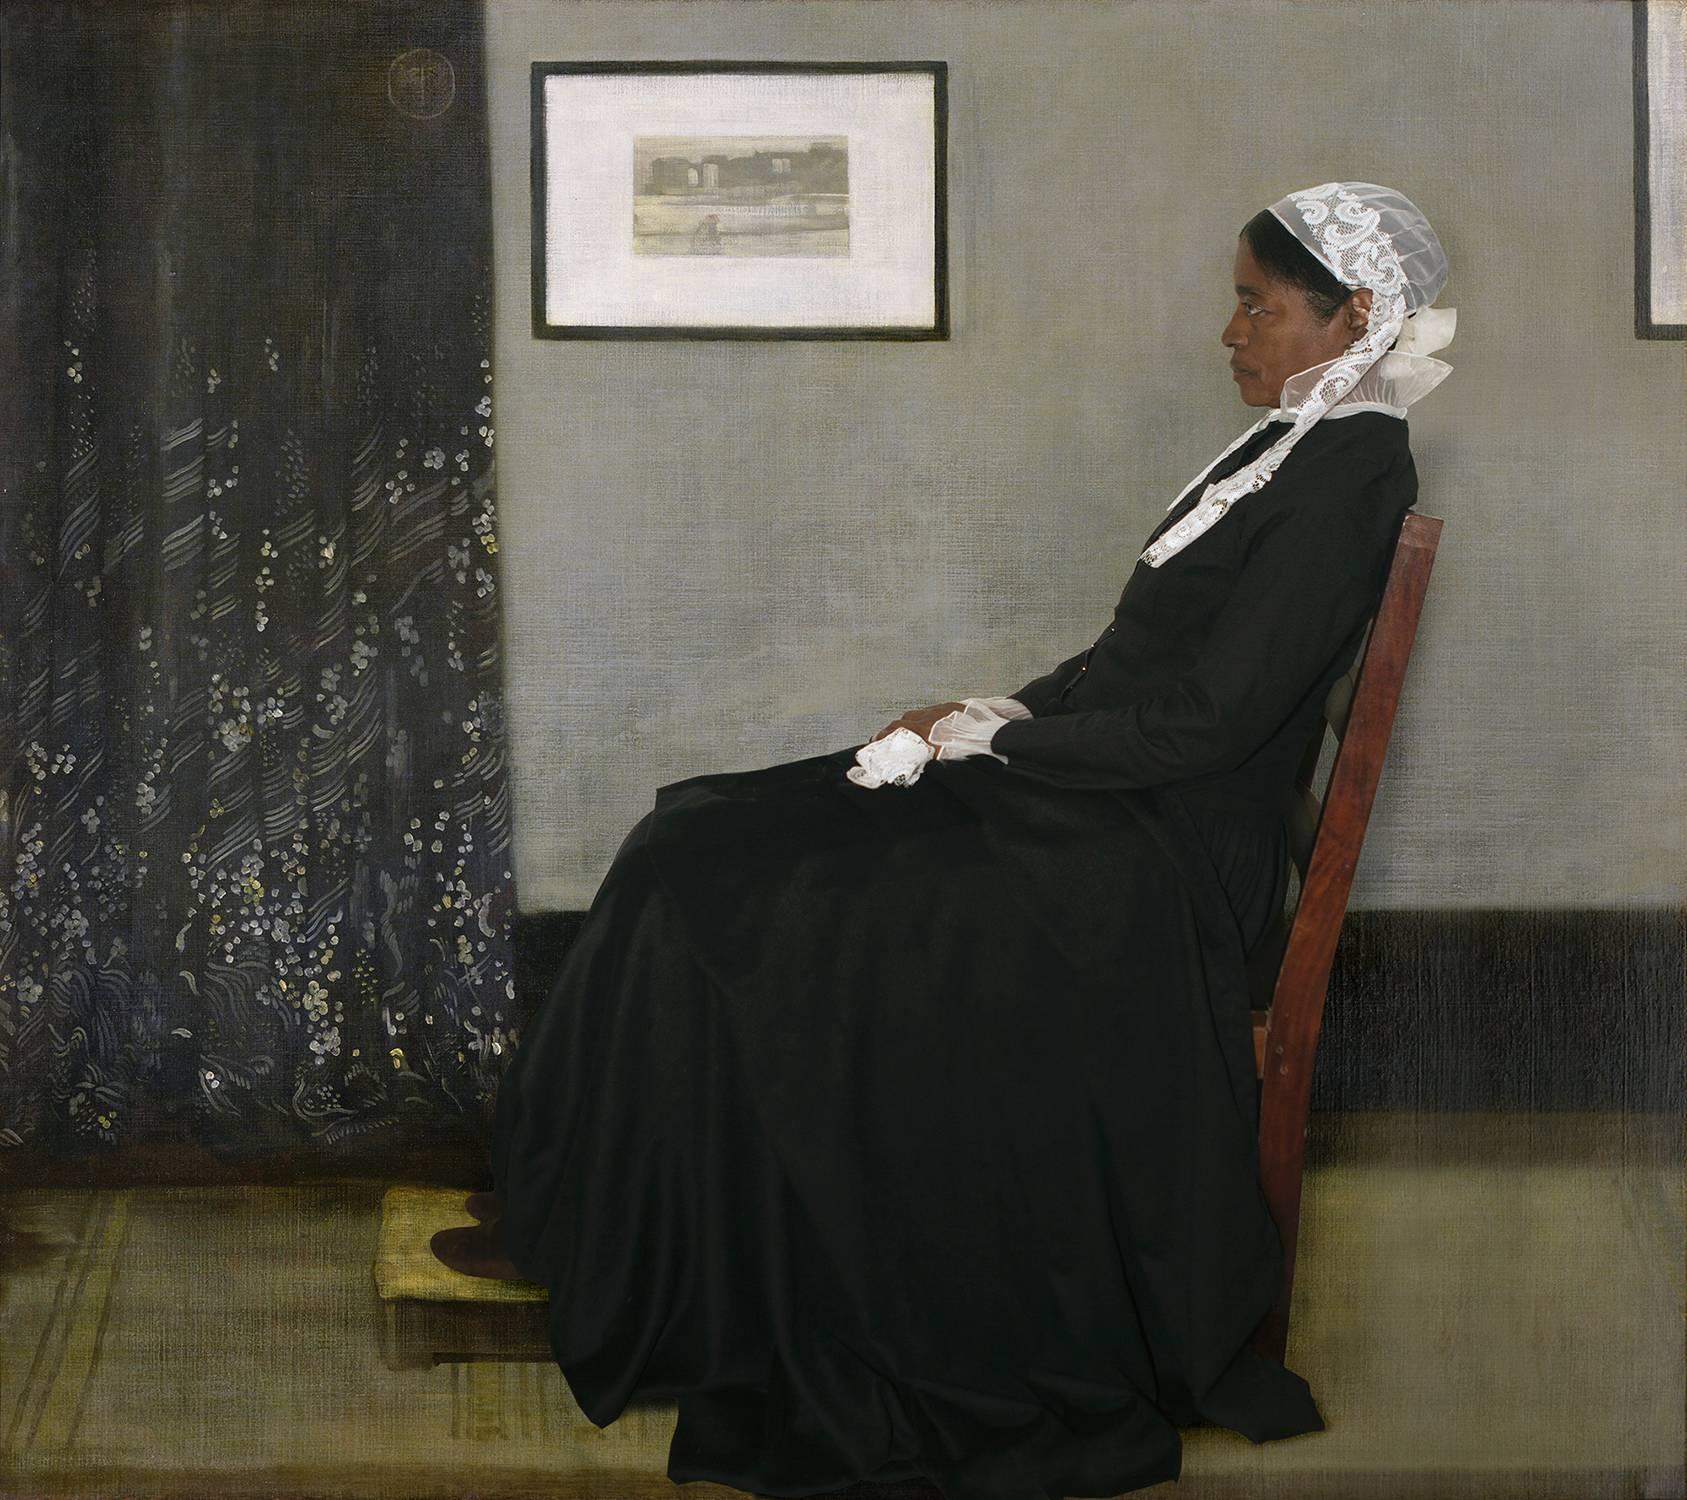 E2 - Kleinveld & Julien Figurative Print - Ode to Whistler's Arrangement in Grey and Black No. 1